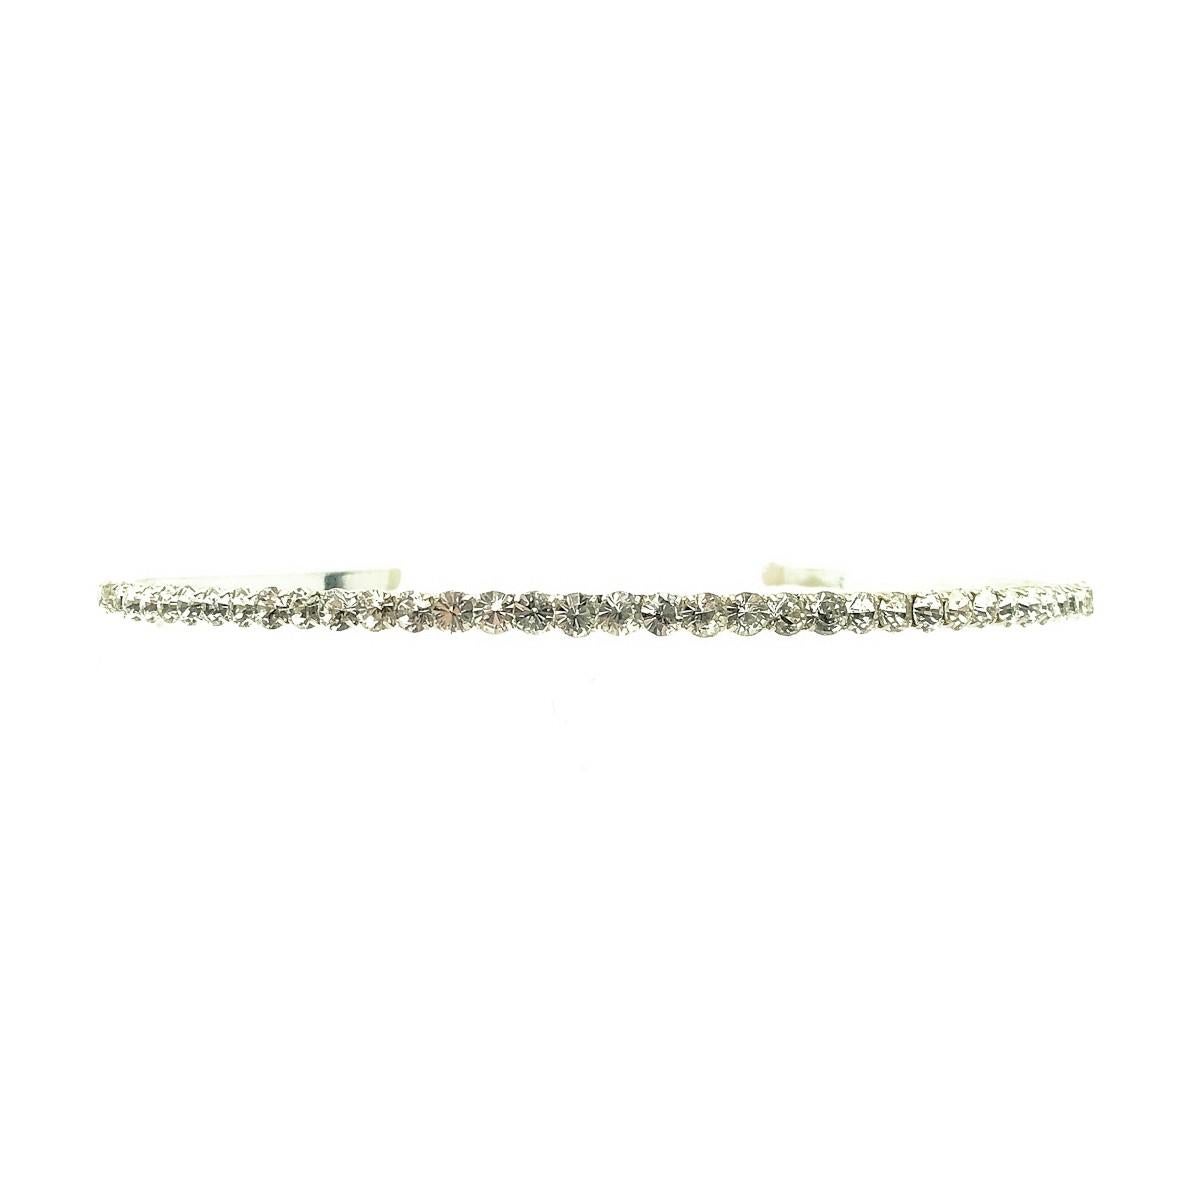 Vintage Silver & Crystal Line Hairband Tiara from the 1980s. Crafted in silver tone metal and claw set crystal stones. Enjoy the age old tradition on your wedding day with this emblem that signifies the crowning of love. In very good vintage